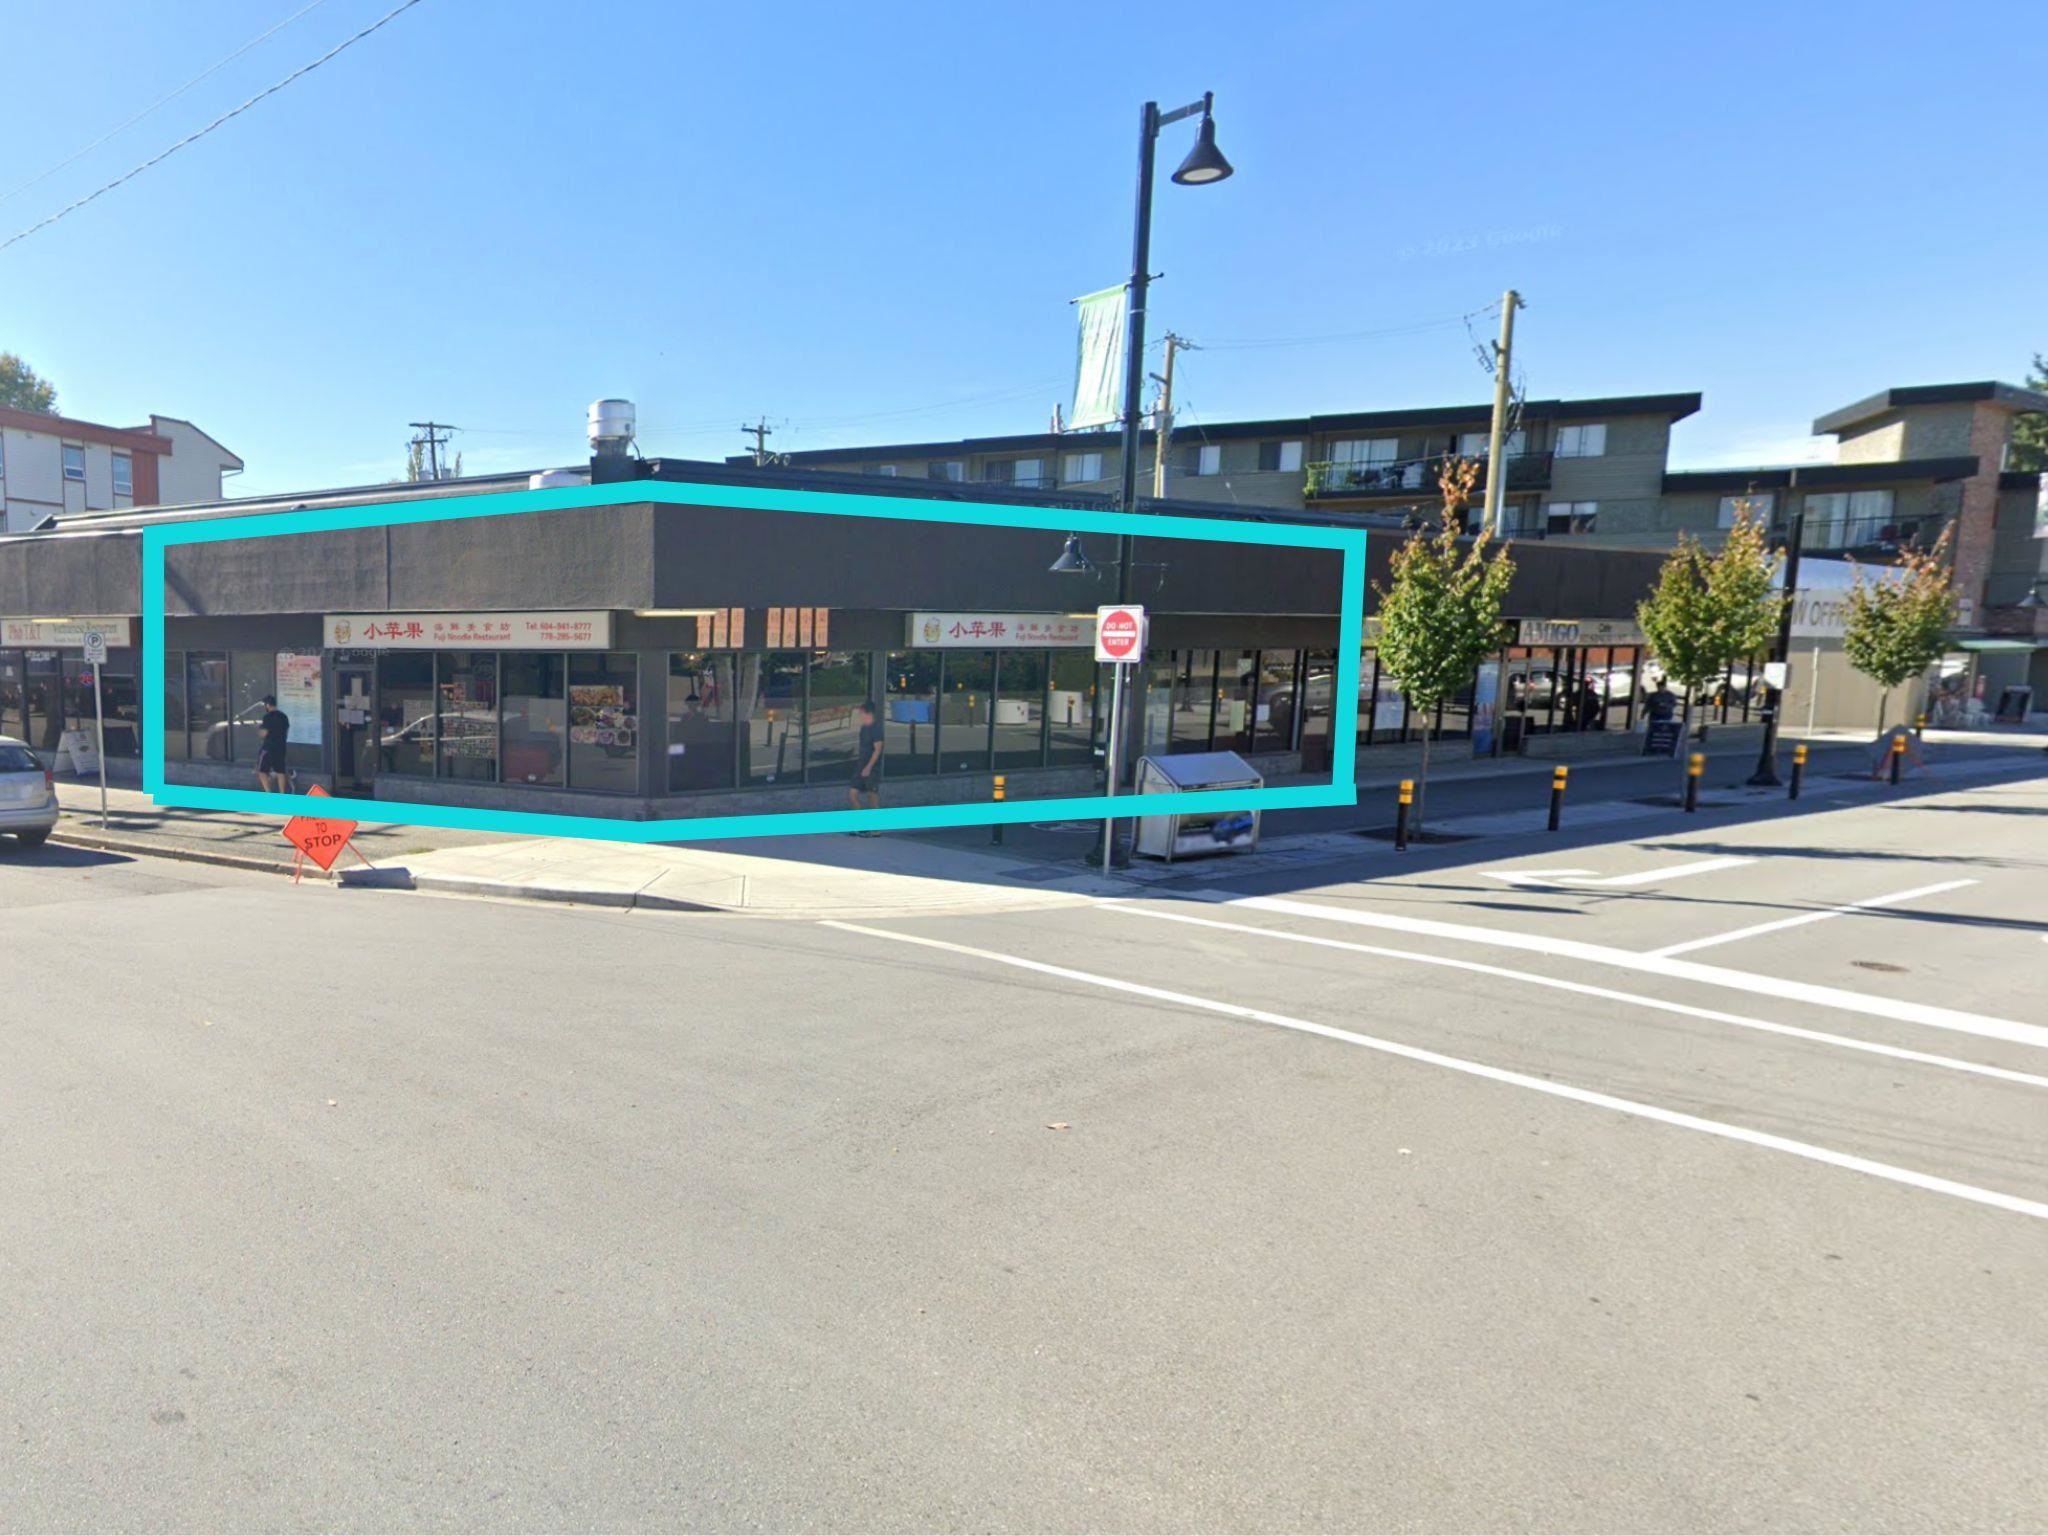 Central Pt Coquitlam Land Commercial for sale:    (Listed 6800-05-17)